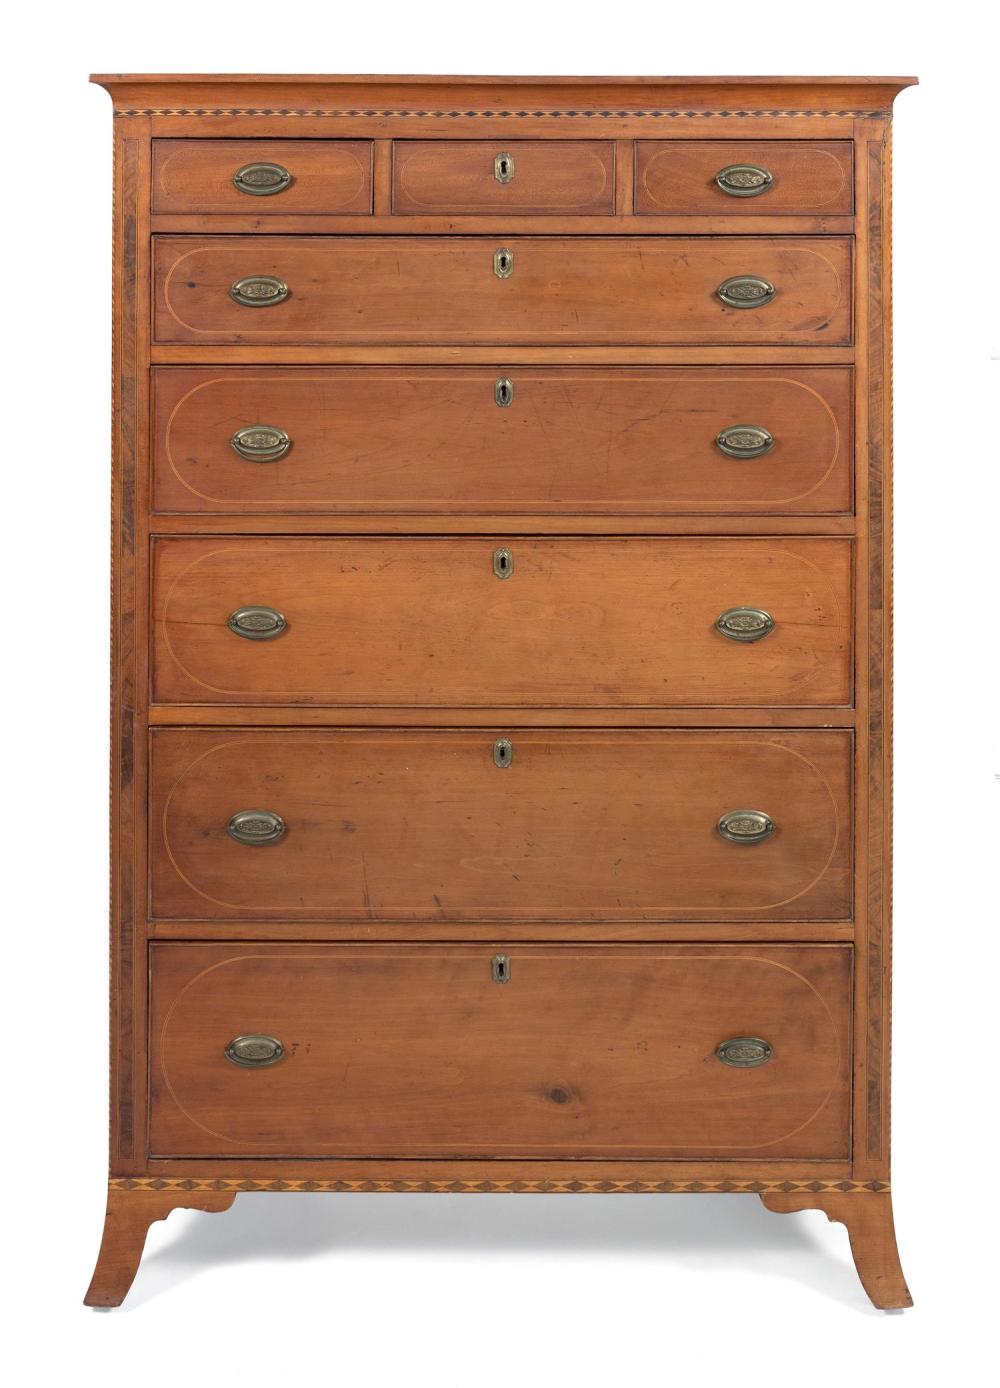 TALL CHEST AMERICA EARLY 19TH 34c425